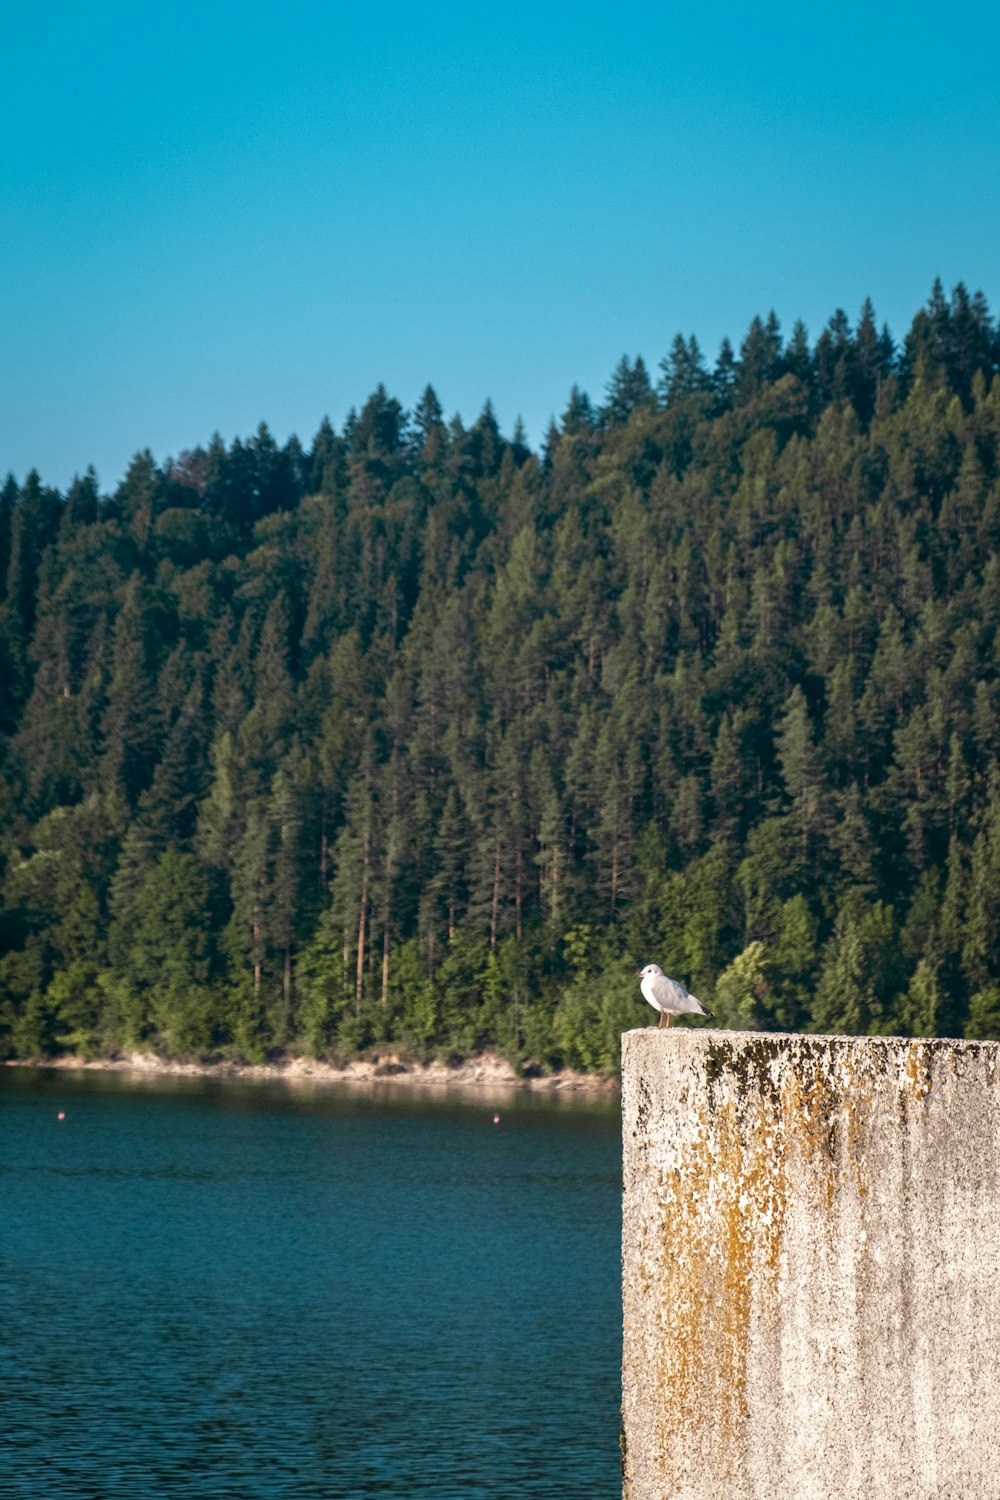 a seagull sitting on a concrete wall next to a body of water